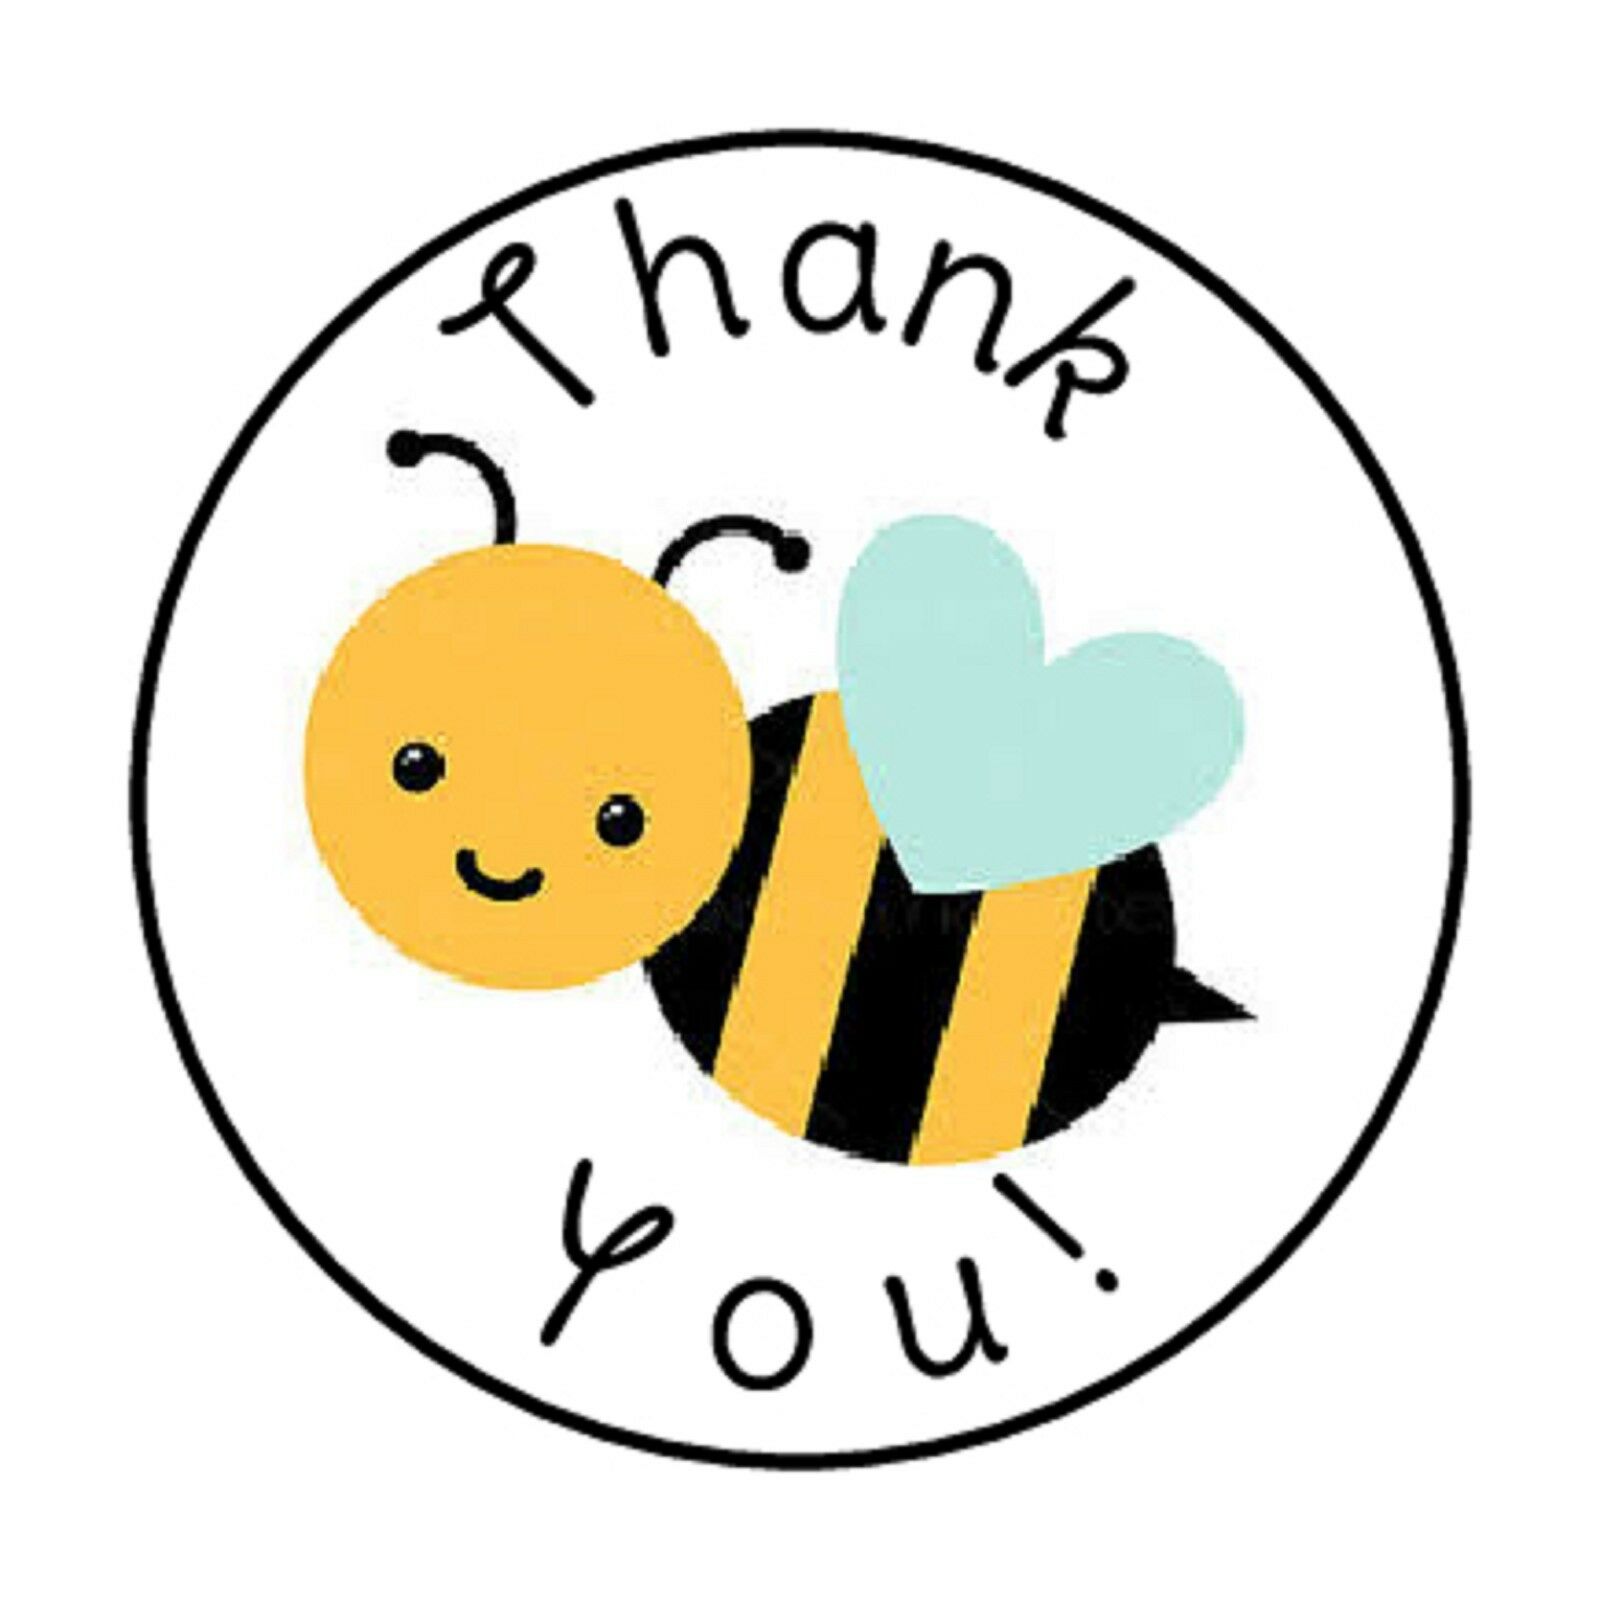 48 Thank You Bumble Bee Envelope Seals Labels Stickers 1.2" Round